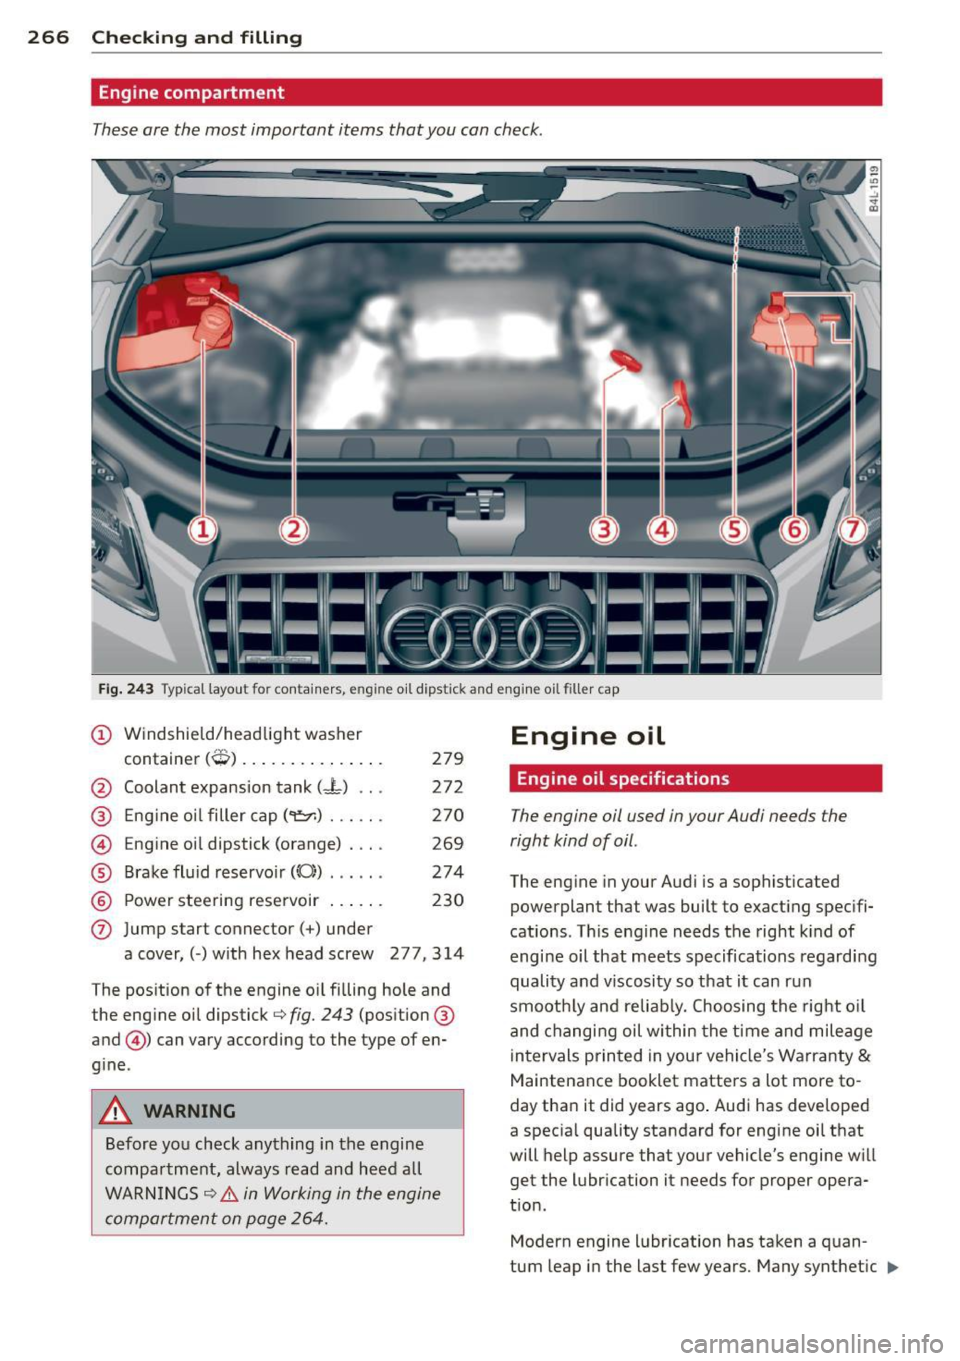 AUDI Q7 2013  Owner´s Manual 266  Checking  and  filling 
Engine  compartment 
These are the  most  important  items  that  you  can check . 
Fig. 243 Typical layout  for  containers,  engine oil  di pstick  and engine oil  fille